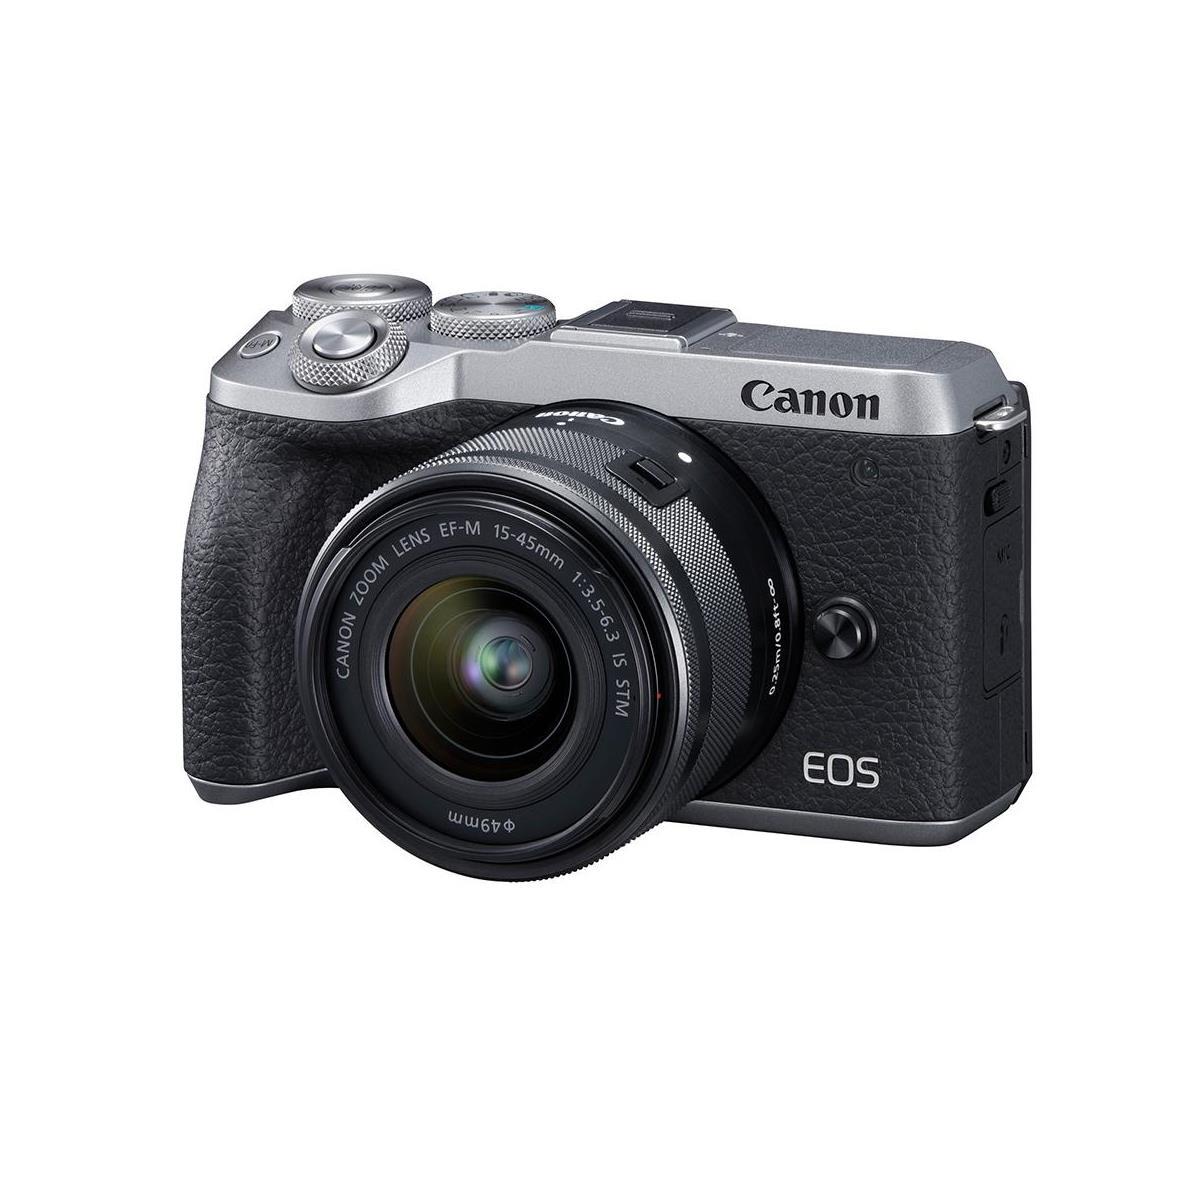 Image of Canon EOS M6 Mark II Mirrorless Camera Silver with 15-45mm Lens